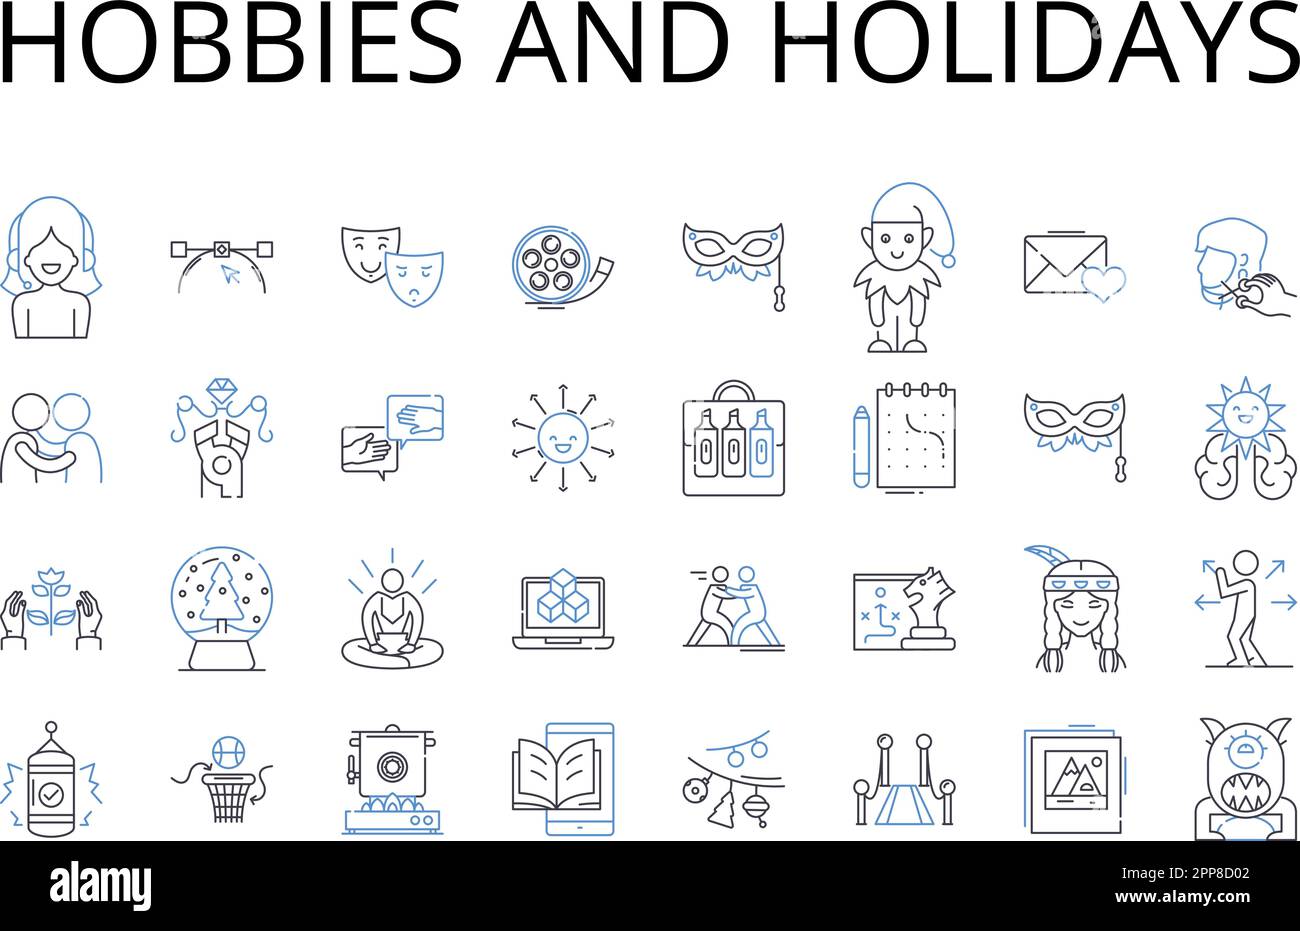 Hobbies and holidays line icons collection. Pastimes, Leisure activities, Pursuits, Interests, Diversions, Recreations, Amusements vector and linear Stock Vector